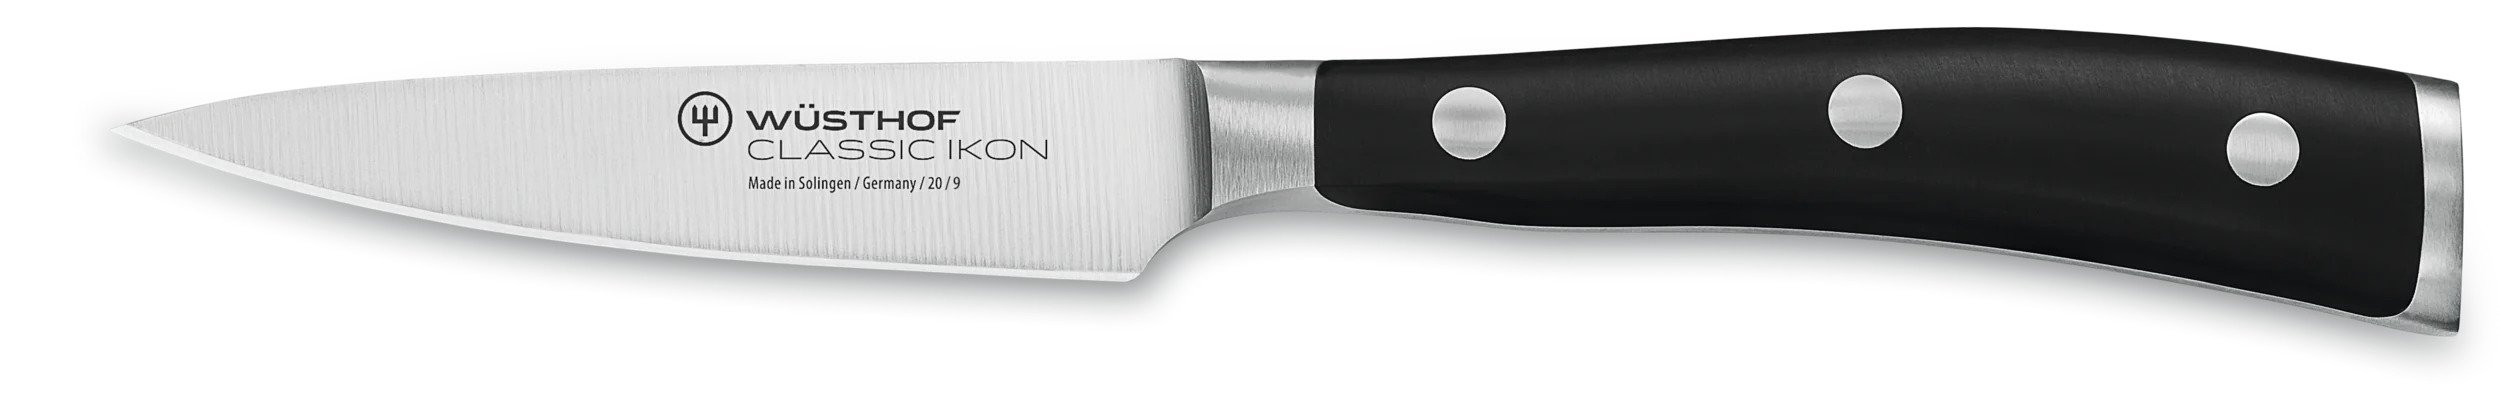 picture of a Wusthof German brand utility knife